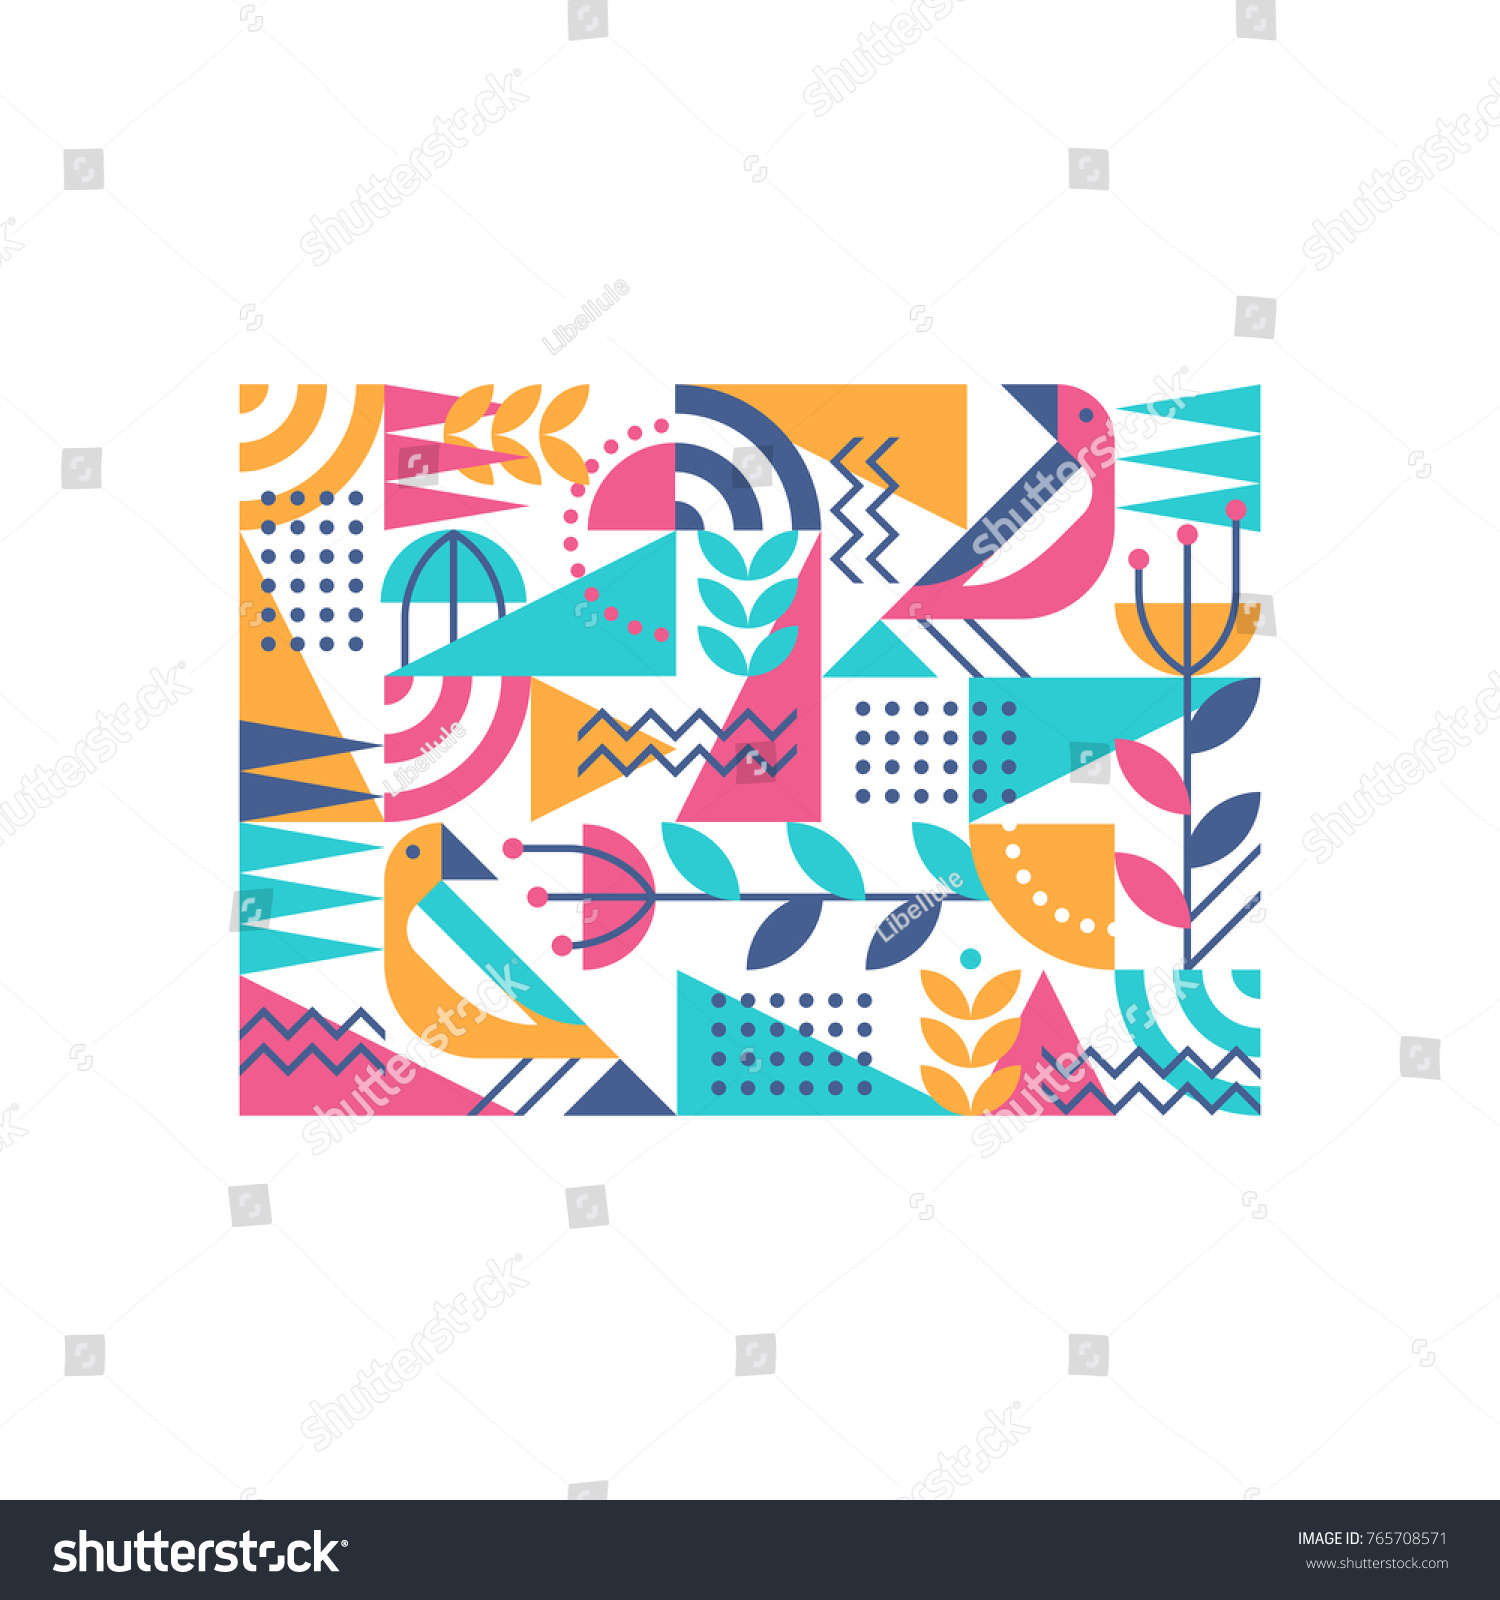 stock-vector-ornamental-flat-design-spring-nature-concept-summer-poster-with-floral-elements-geometrical-765708571